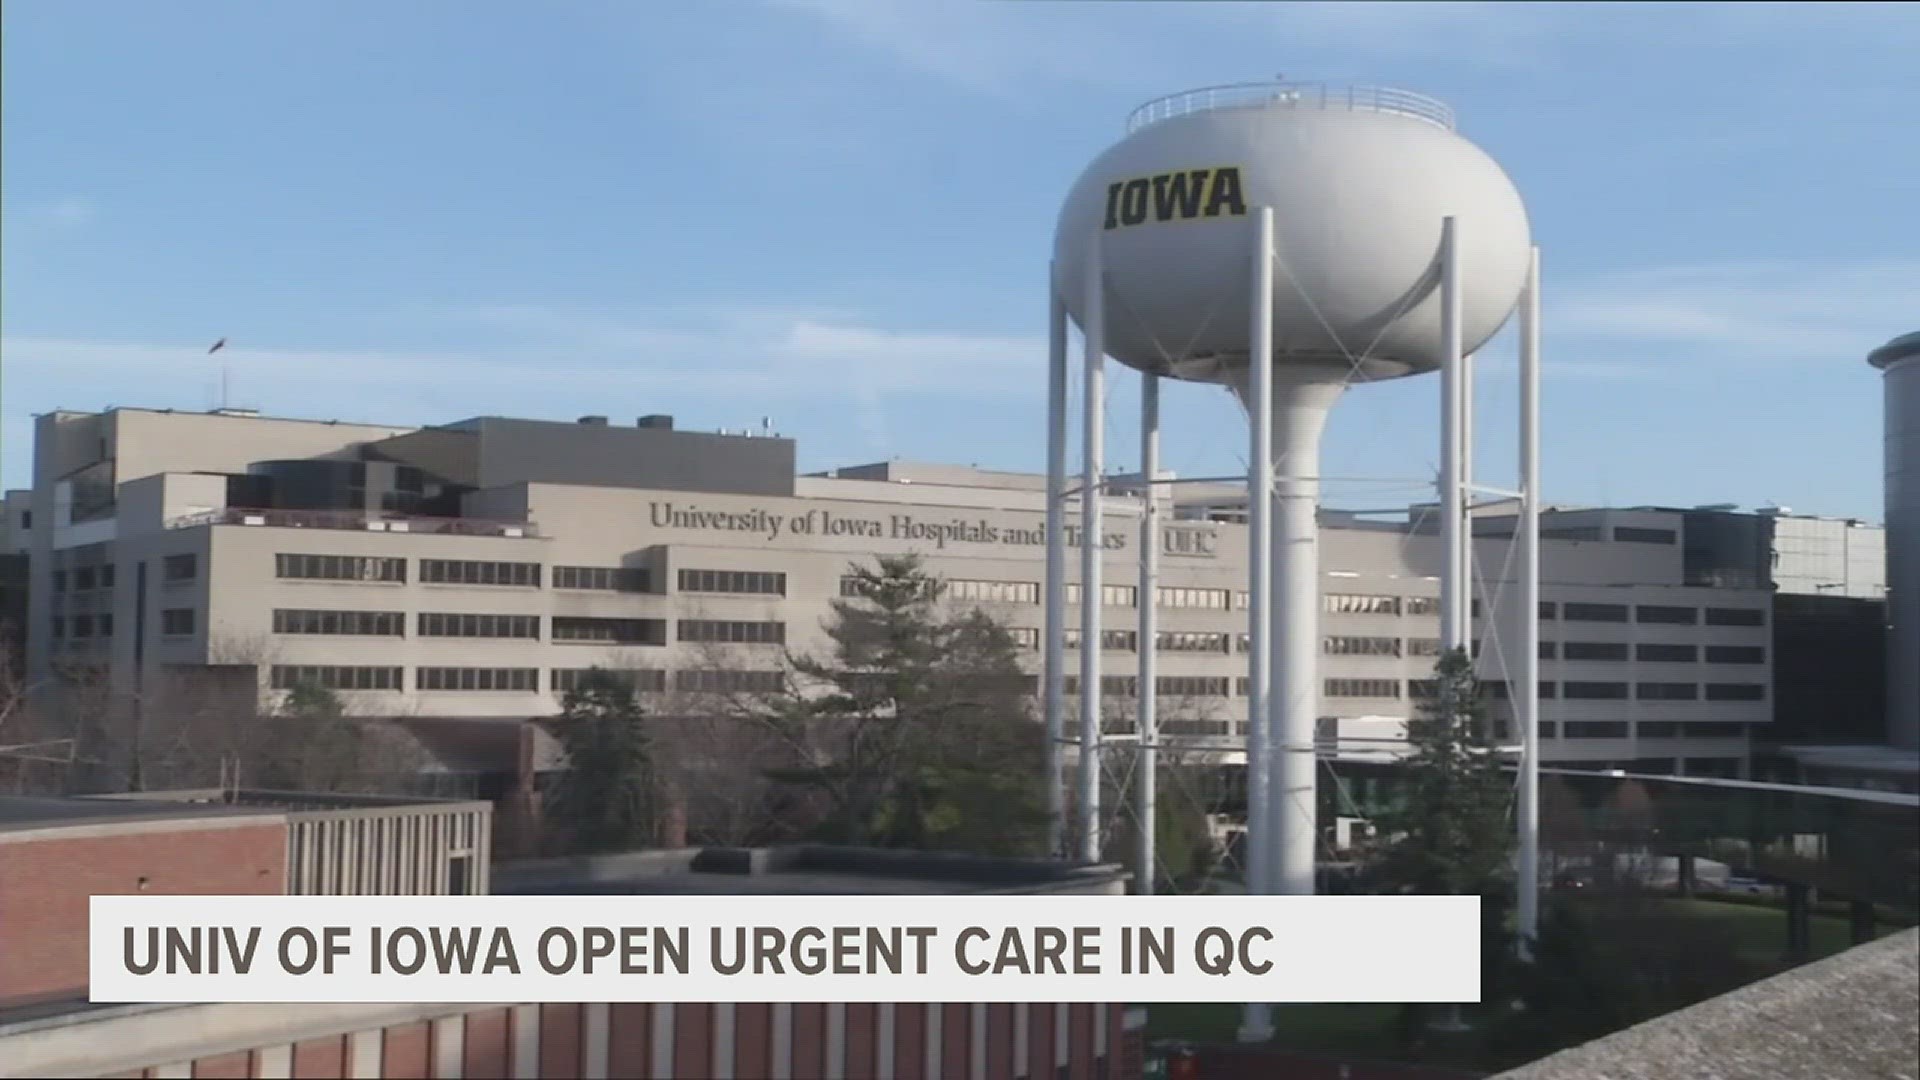 The university says its goal is to provide more convenient access and continuity of care for patients and employees who live in the Quad Cities area.